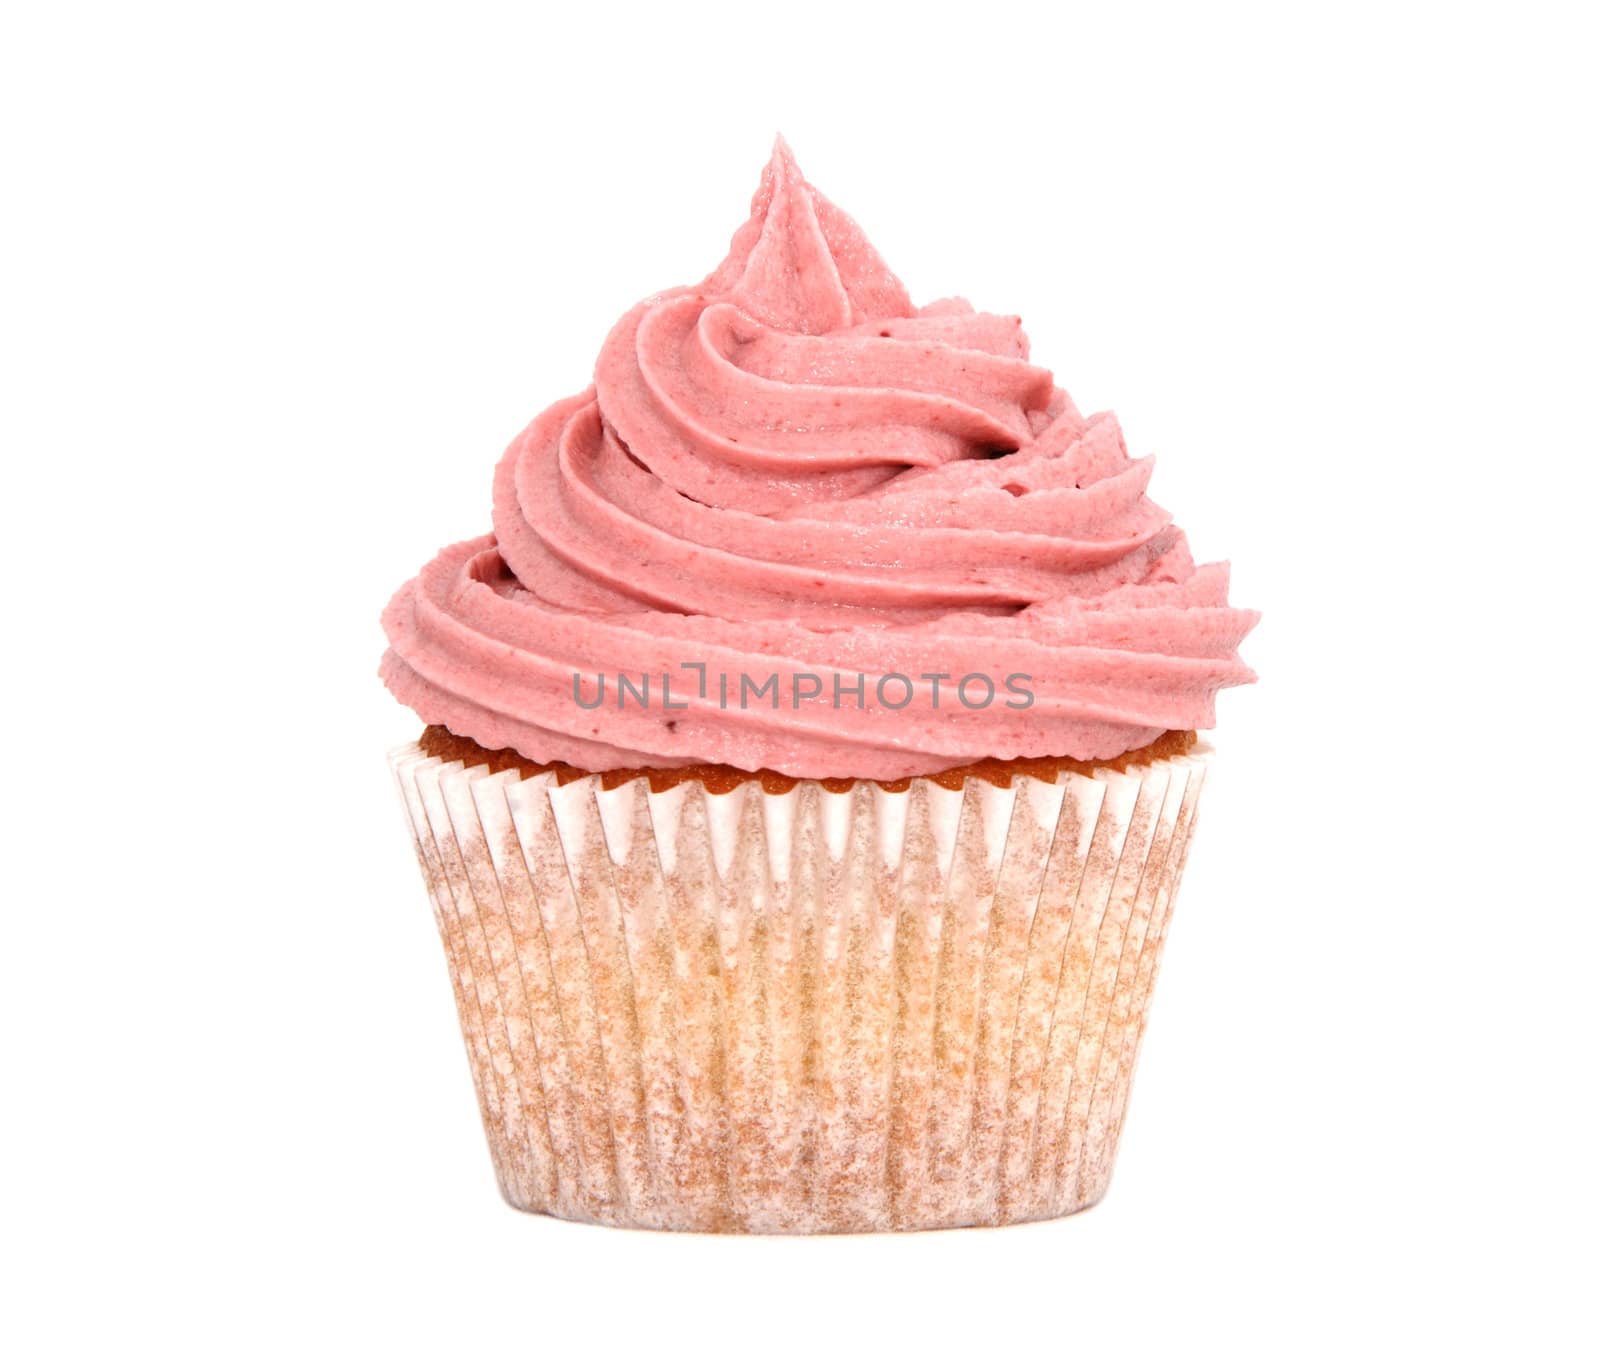 Delicious fresh cupcake with a swirl of pink raspberry icing on top